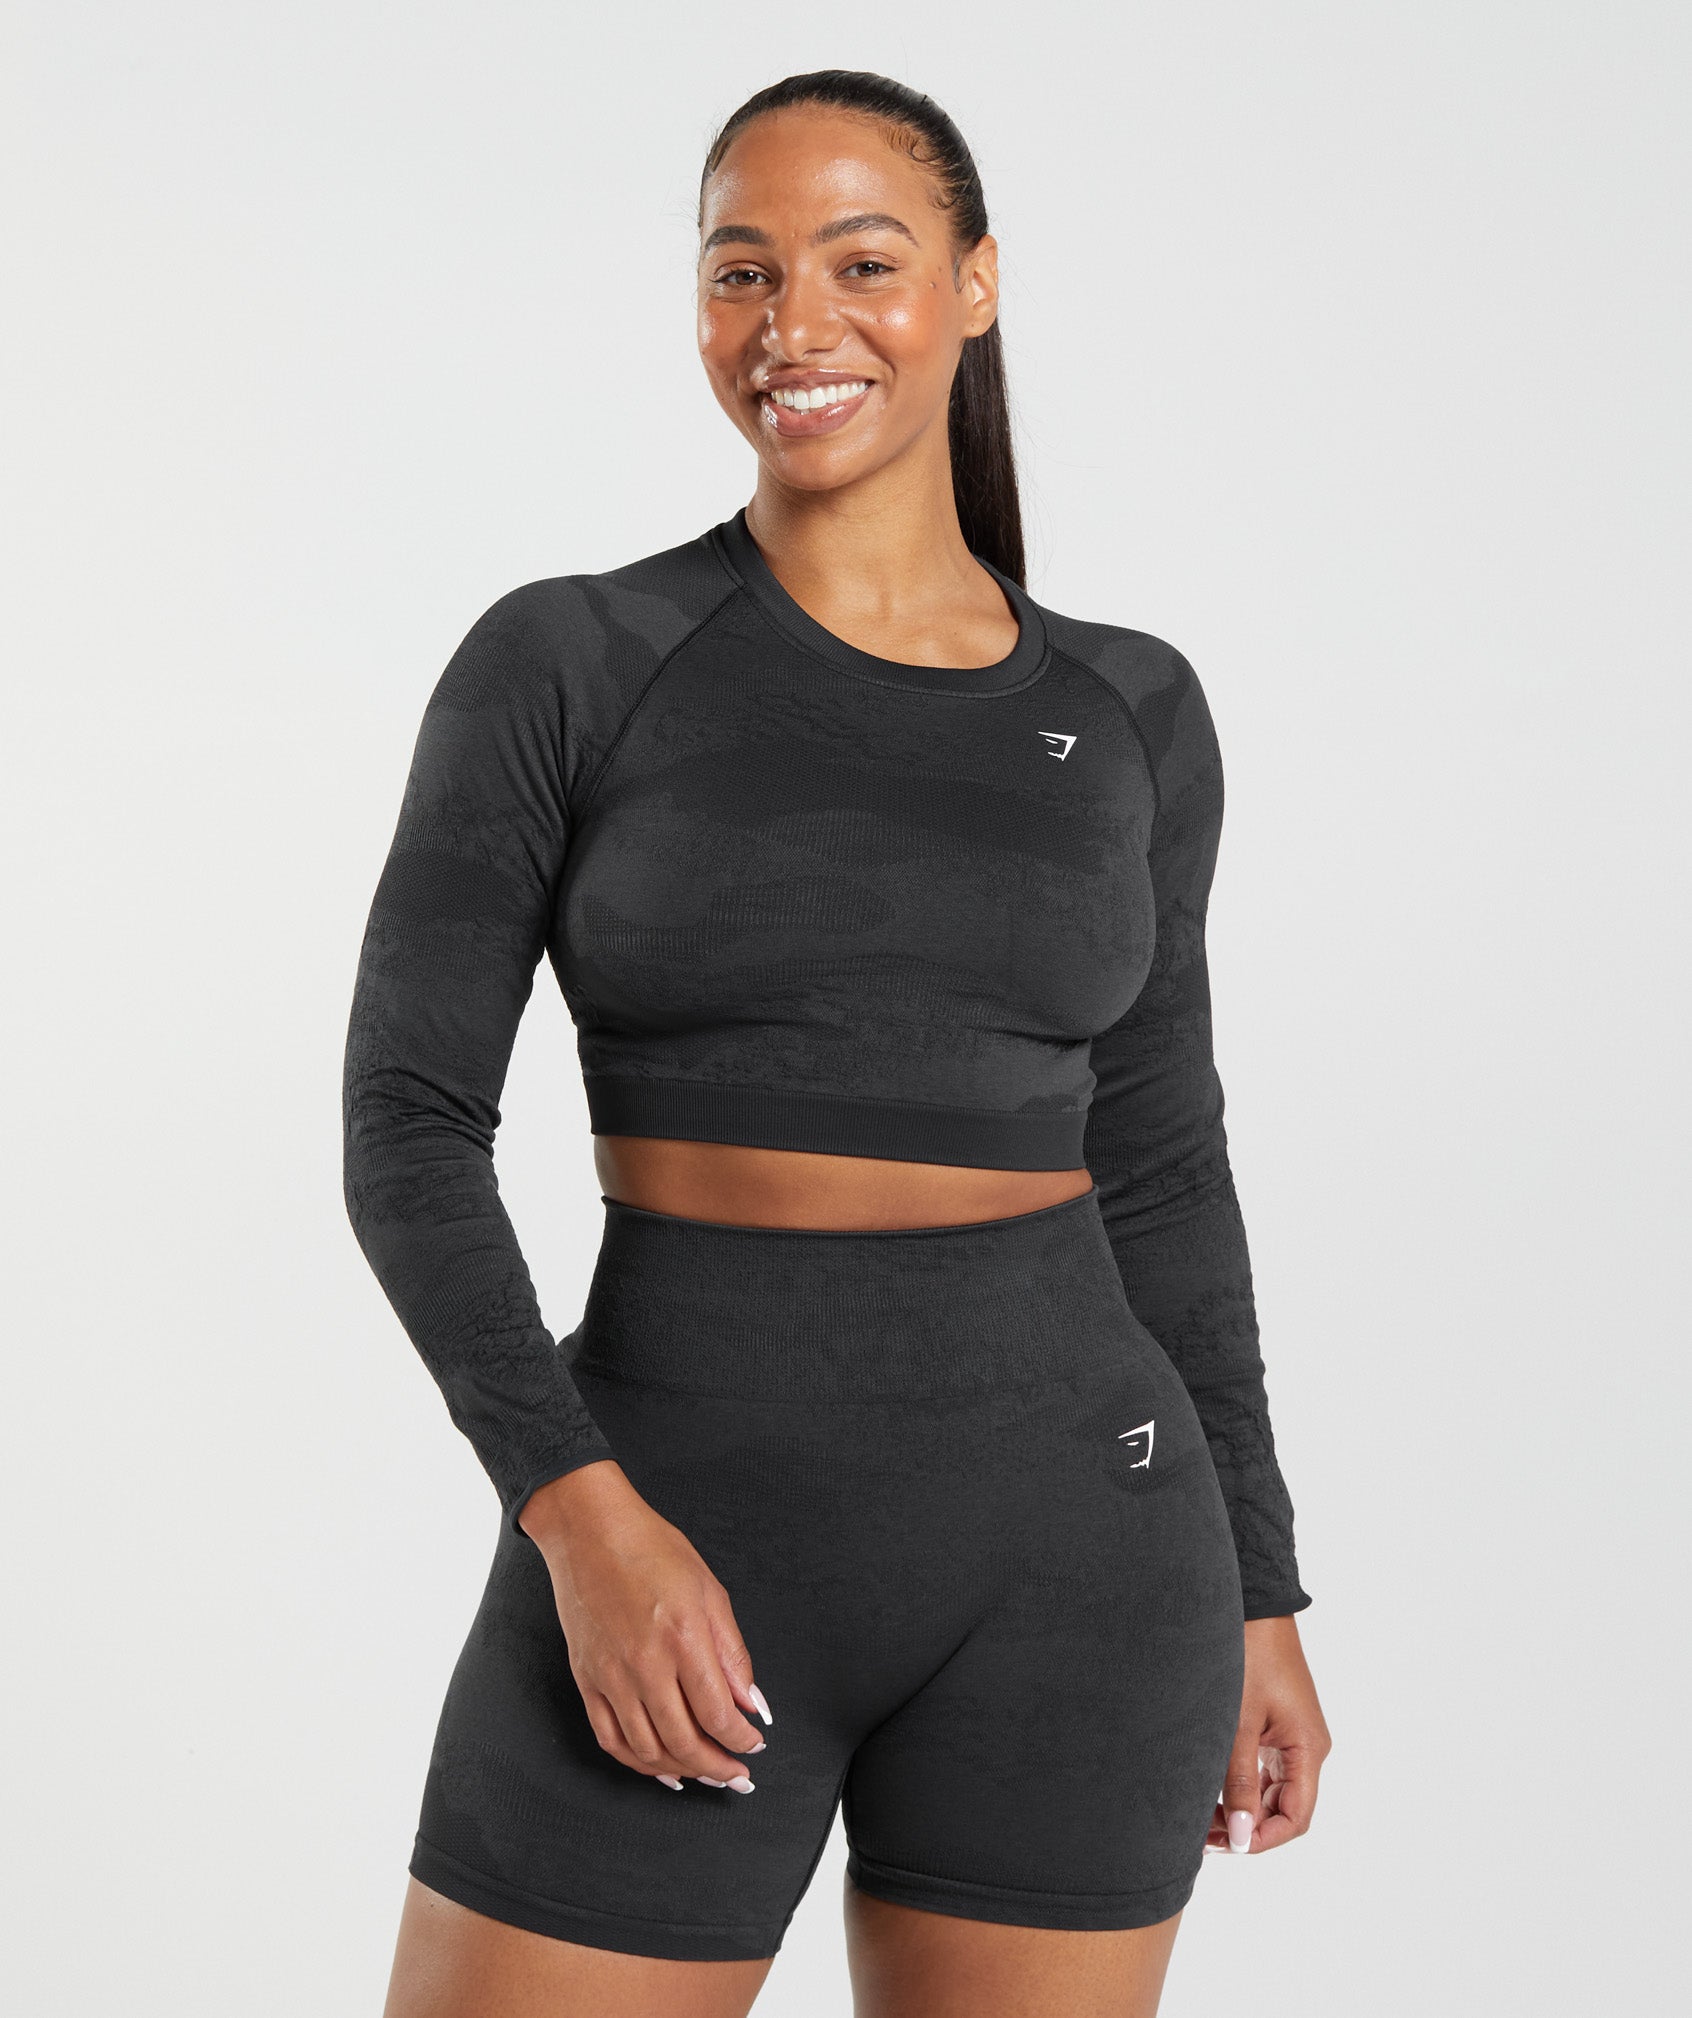 Adapt Camo Seamless Lace Up Back Top in Black/Onyx Grey